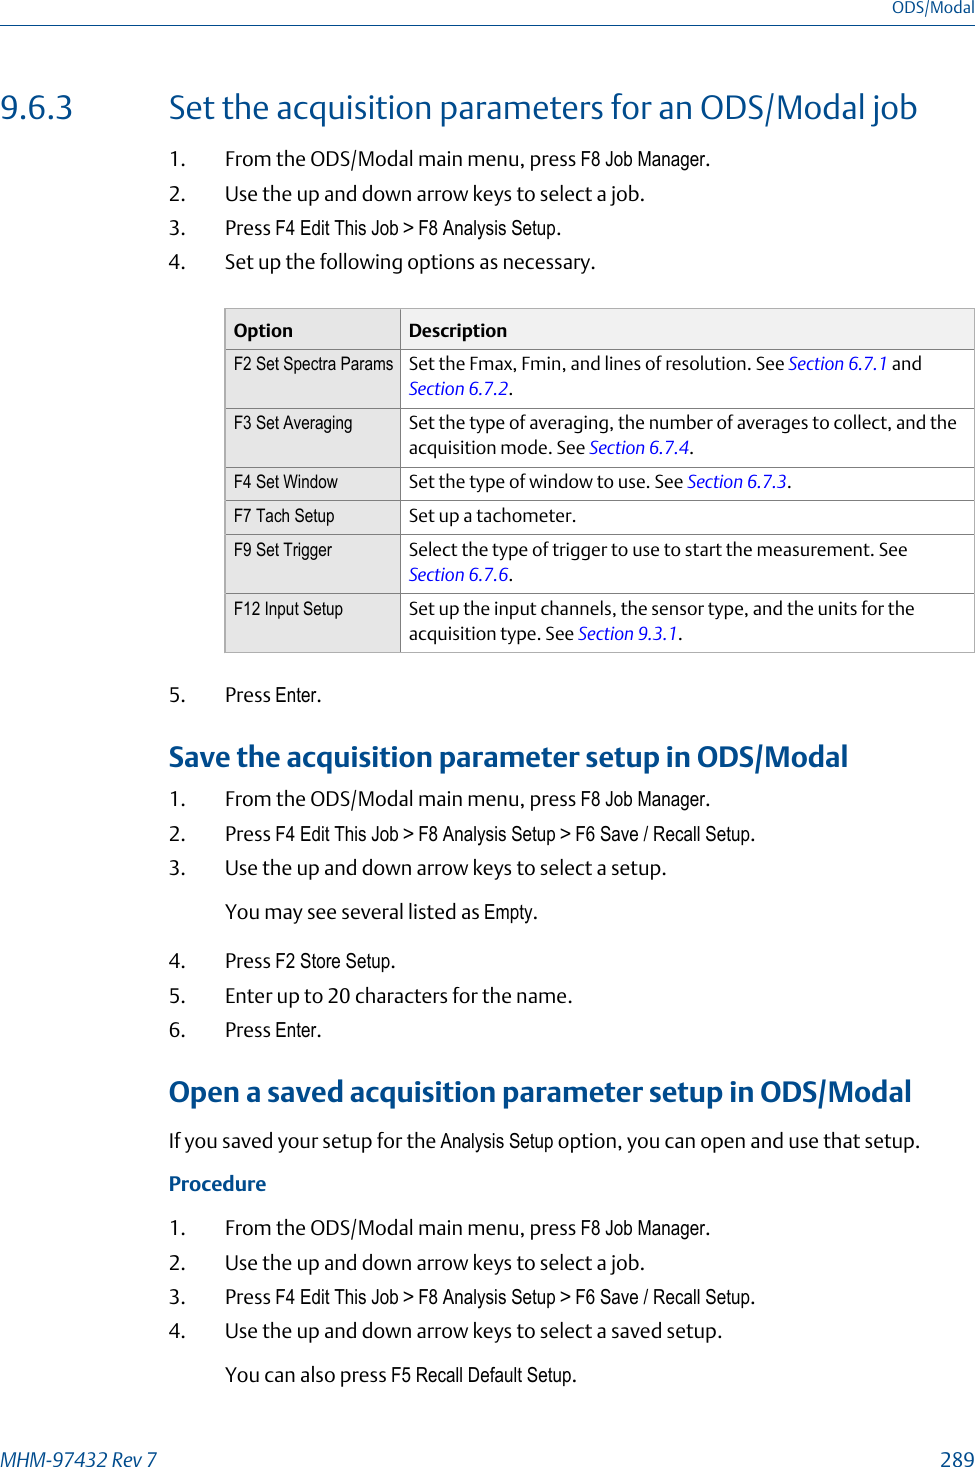 9.6.3 Set the acquisition parameters for an ODS/Modal job1. From the ODS/Modal main menu, press F8 Job Manager.2. Use the up and down arrow keys to select a job.3. Press F4 Edit This Job &gt; F8 Analysis Setup.4. Set up the following options as necessary.Option DescriptionF2 Set Spectra Params Set the Fmax, Fmin, and lines of resolution. See Section 6.7.1 and Section 6.7.2.F3 Set Averaging Set the type of averaging, the number of averages to collect, and theacquisition mode. See Section 6.7.4.F4 Set Window Set the type of window to use. See Section 6.7.3.F7 Tach Setup Set up a tachometer.F9 Set Trigger Select the type of trigger to use to start the measurement. See Section 6.7.6.F12 Input Setup Set up the input channels, the sensor type, and the units for theacquisition type. See Section 9.3.1.5. Press Enter.Save the acquisition parameter setup in ODS/Modal1. From the ODS/Modal main menu, press F8 Job Manager.2. Press F4 Edit This Job &gt; F8 Analysis Setup &gt; F6 Save / Recall Setup.3. Use the up and down arrow keys to select a setup.You may see several listed as Empty.4. Press F2 Store Setup.5. Enter up to 20 characters for the name.6. Press Enter.Open a saved acquisition parameter setup in ODS/ModalIf you saved your setup for the Analysis Setup option, you can open and use that setup.Procedure1. From the ODS/Modal main menu, press F8 Job Manager.2. Use the up and down arrow keys to select a job.3. Press F4 Edit This Job &gt; F8 Analysis Setup &gt; F6 Save / Recall Setup.4. Use the up and down arrow keys to select a saved setup.You can also press F5 Recall Default Setup.ODS/ModalMHM-97432 Rev 7  289